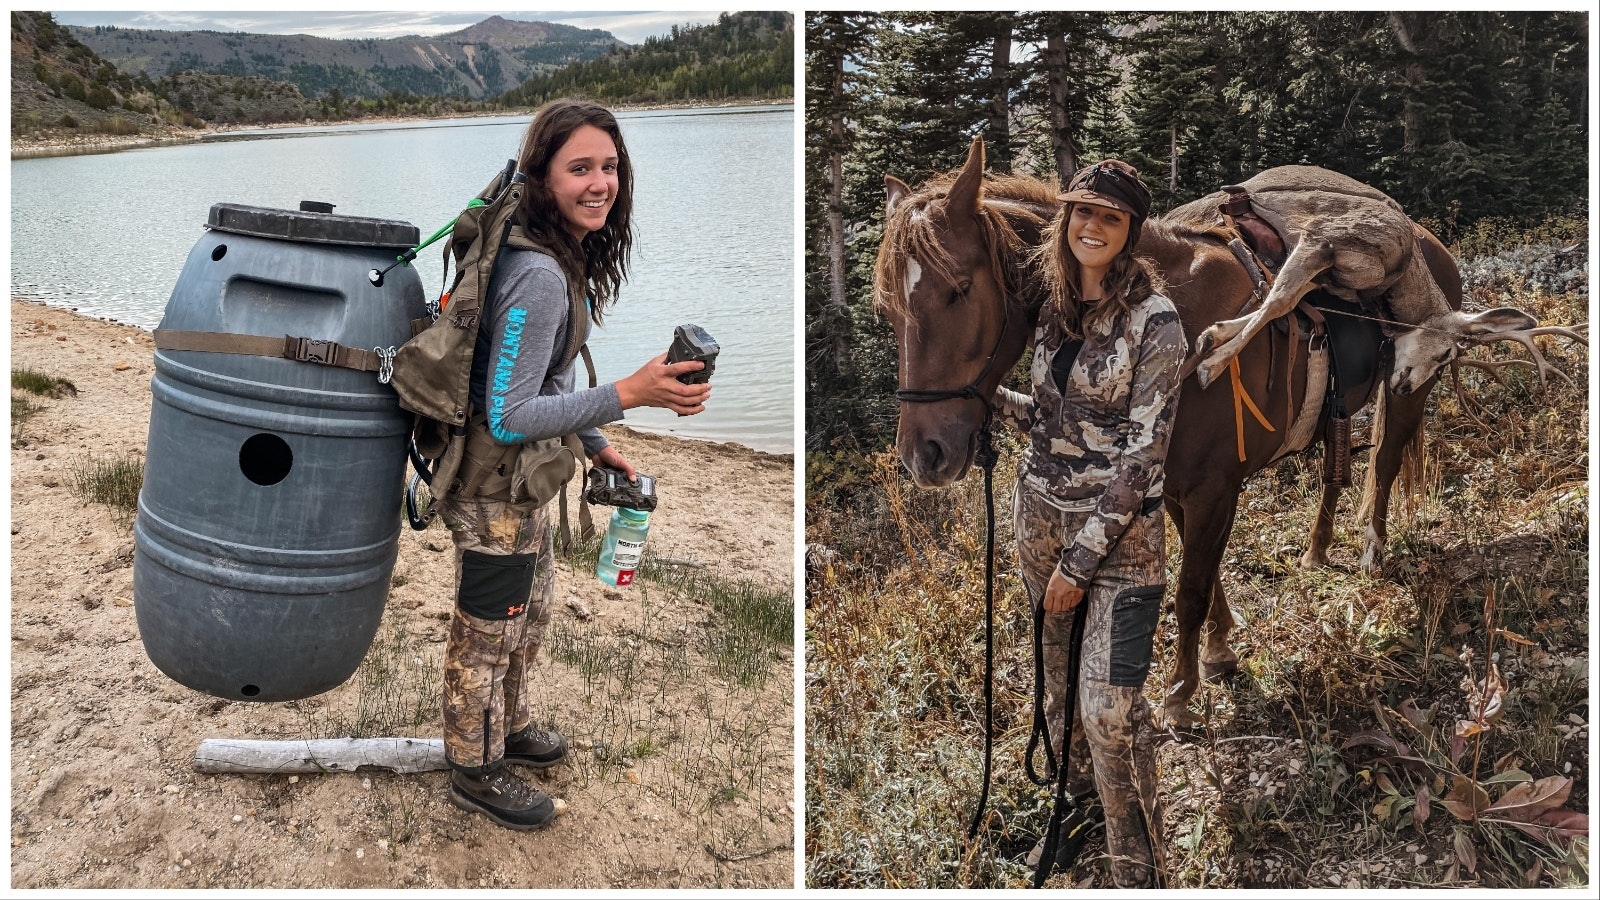 Samantha Strable of Pinedale recently put out a call on social media, asking fellow Sublette County residents if they could spare meat for her bear bait barrel, left. When she’s not hunting abroad, Strable enjoys Wyoming outings for species such as mule deer.